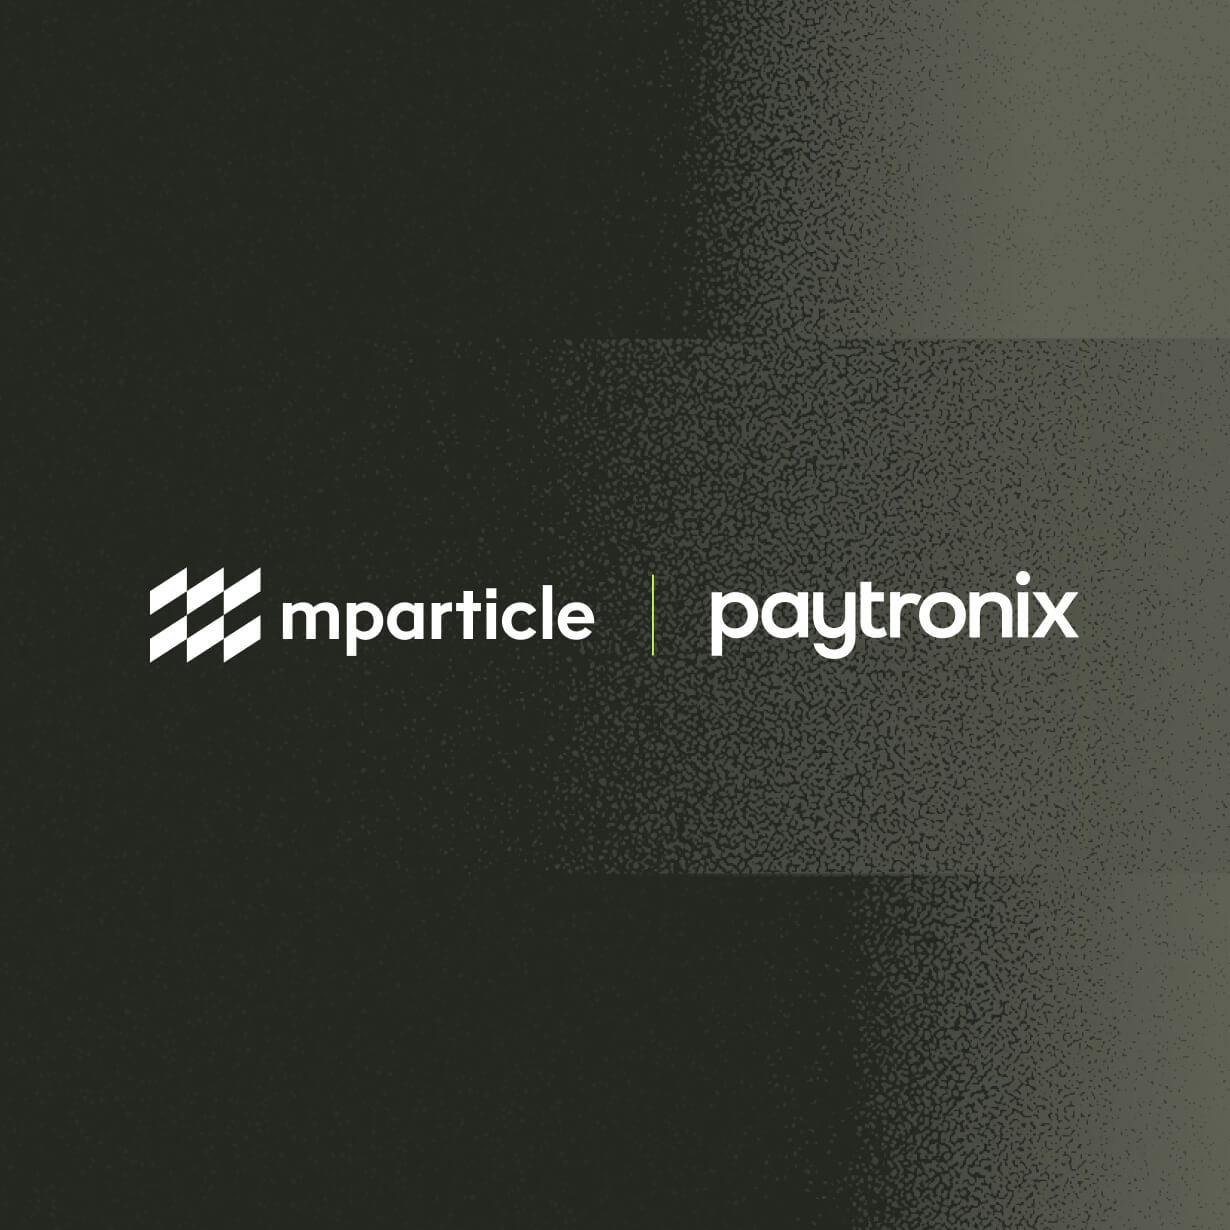 Get more value out of your loyalty data with the mParticle Paytronix integration